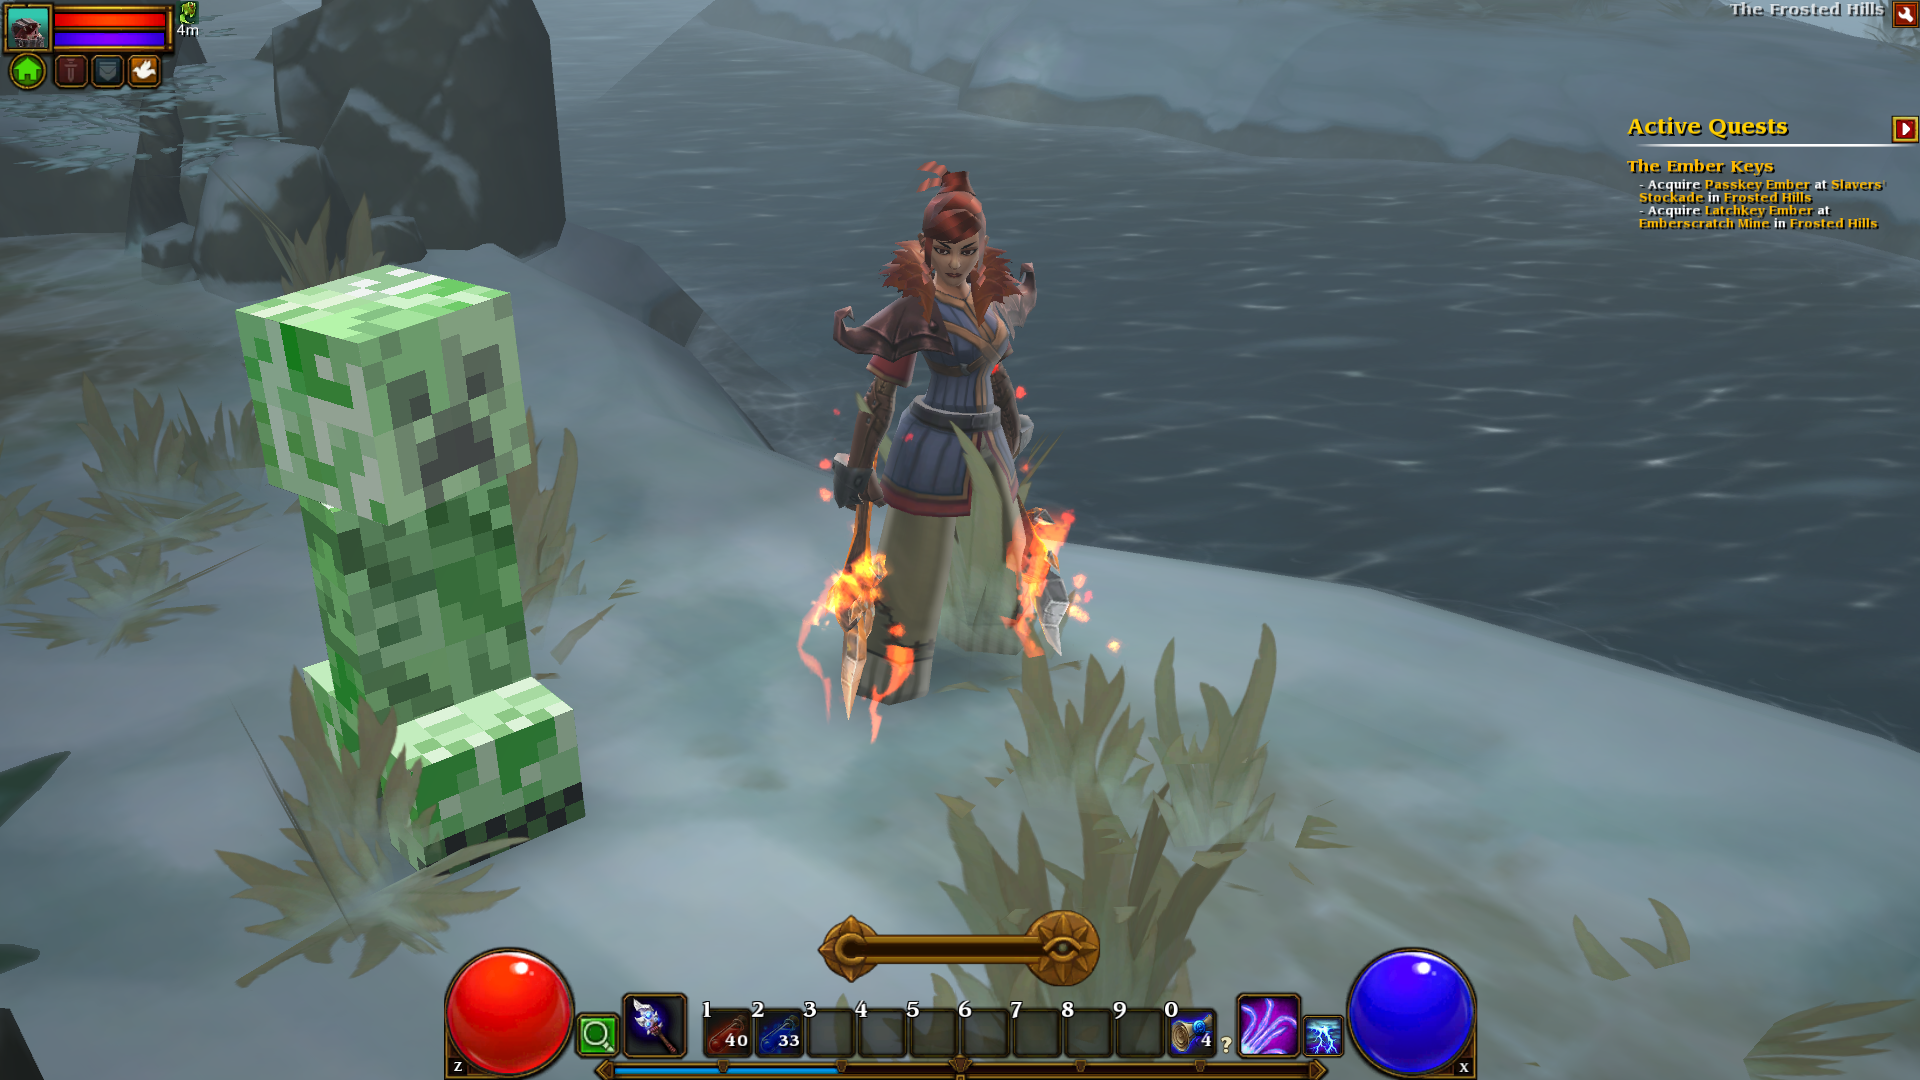 Minecraft Easter Egg in Torchlight 2